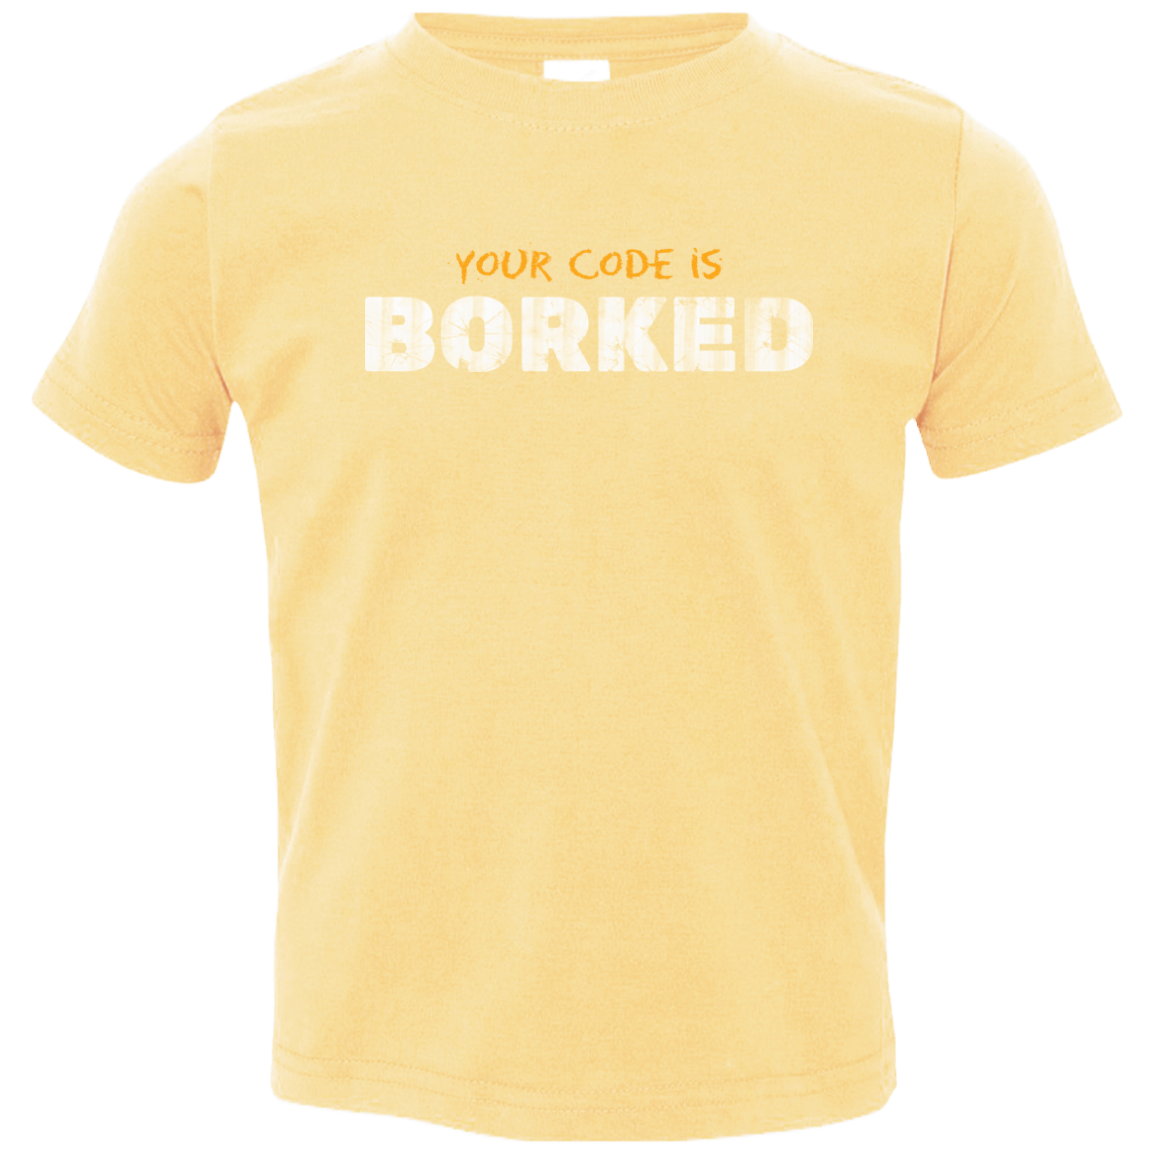 Your Code Is Borked Toddler Premium T-Shirt